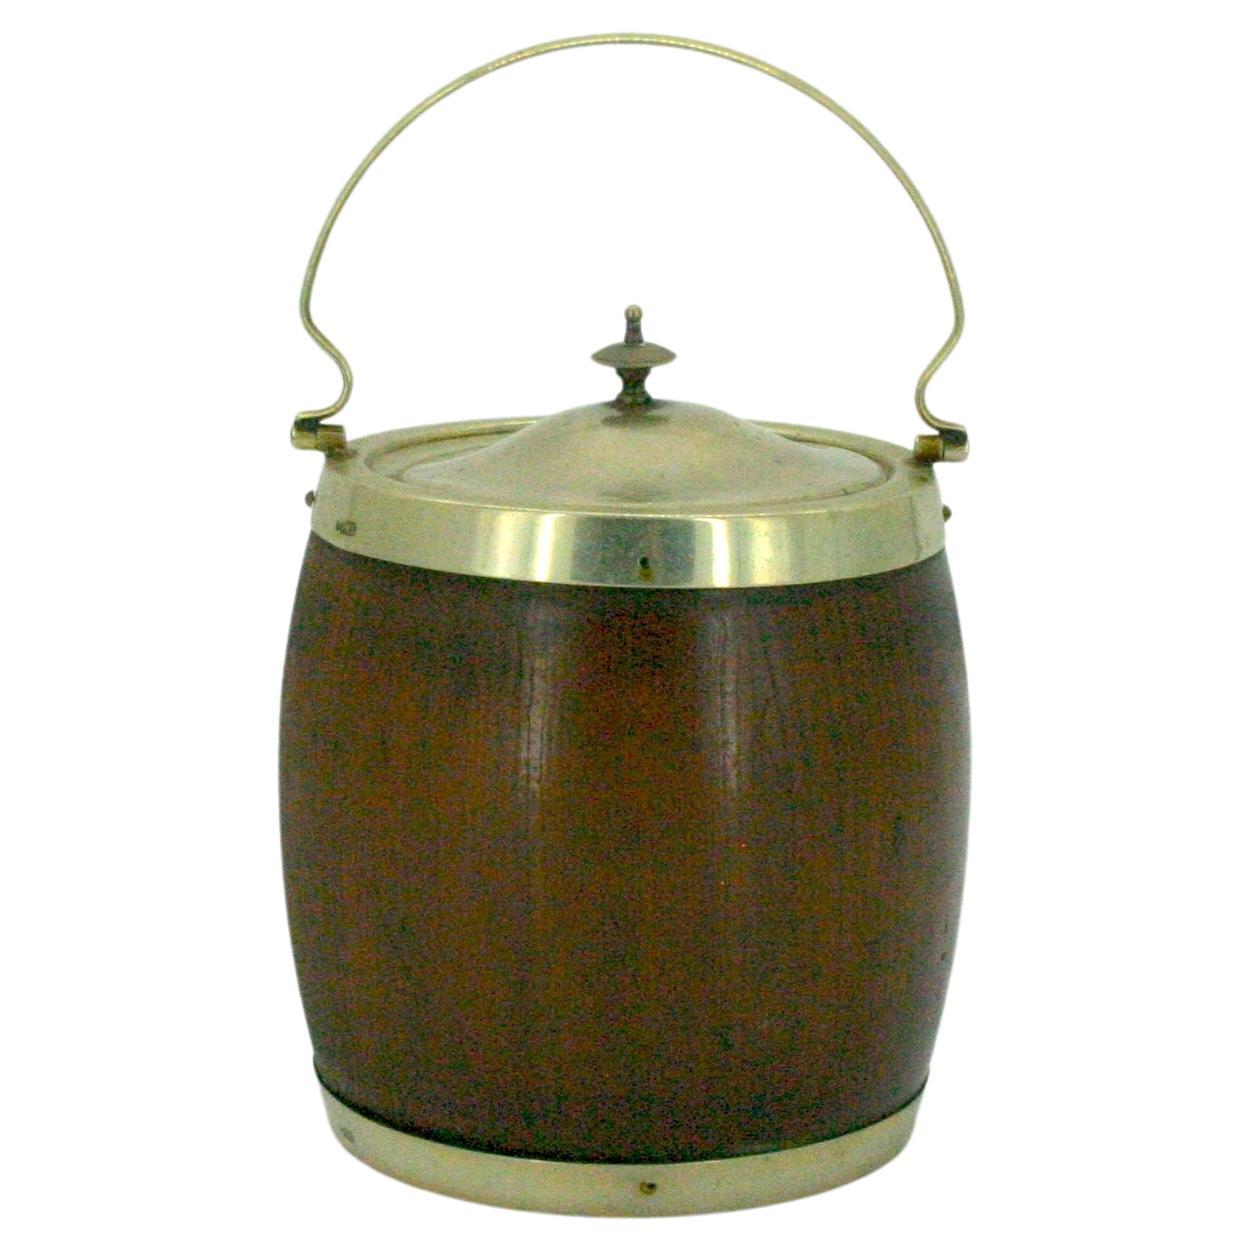 English oak with silver plated frame ice bucket / biscuit barrel with white interior ceramic liner. The biscuit box / ice bucket features a removable silver plate cover and holding top handle. It's in good antique condition with wear appropriate